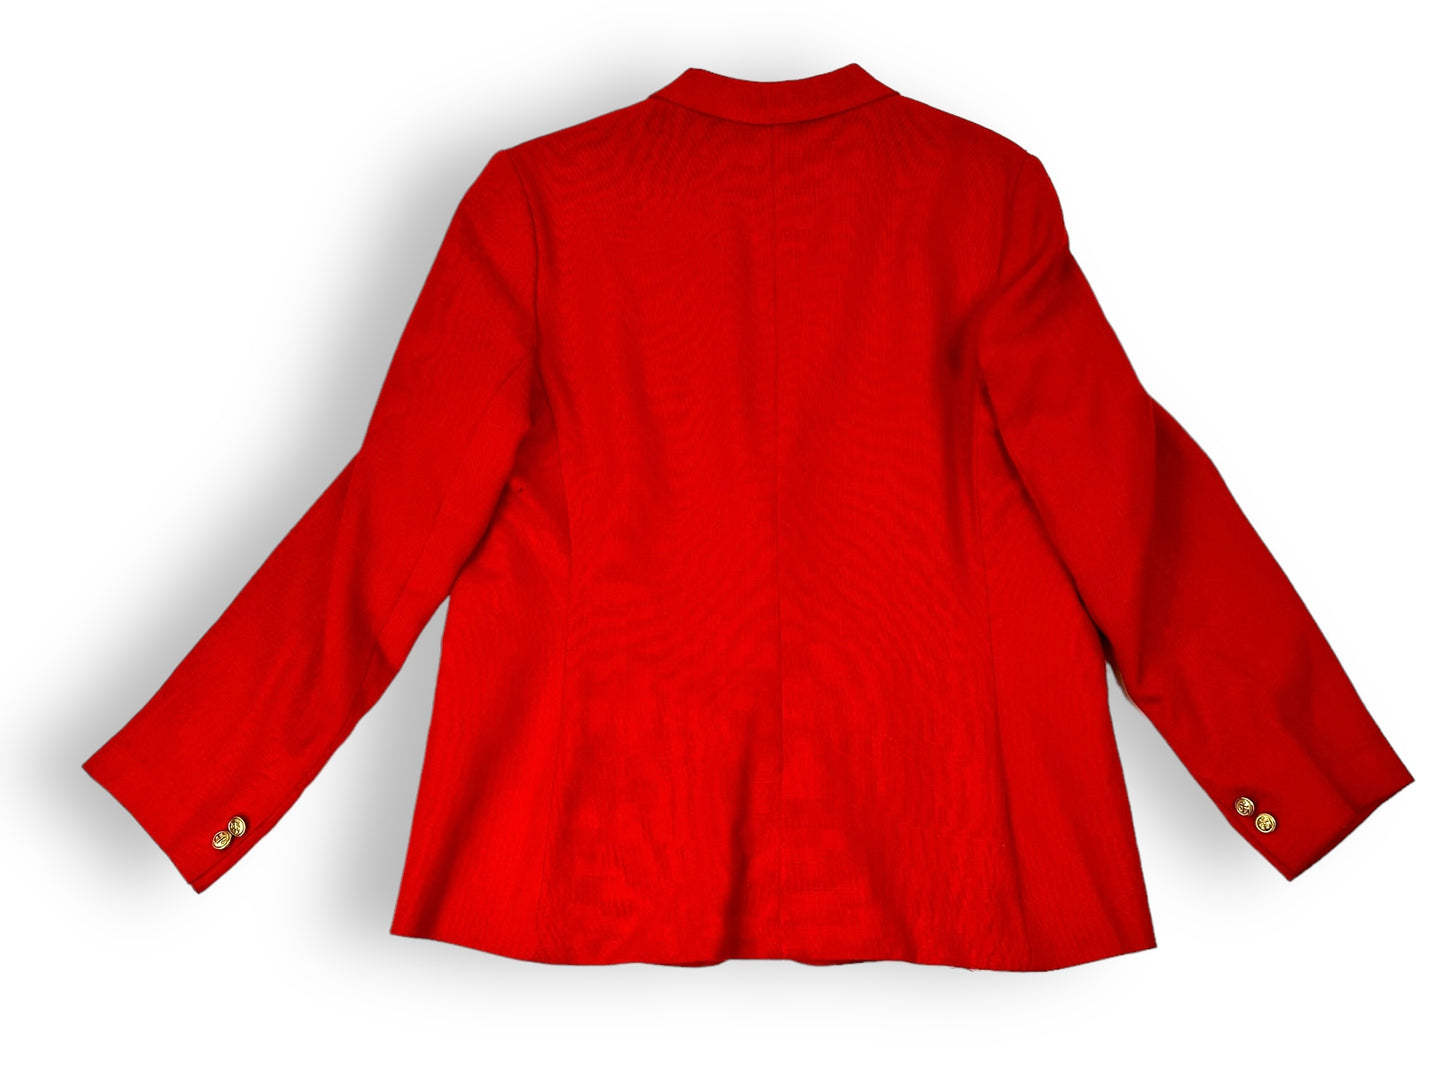 Andersonville: Kameo Up cycled Red Blazer